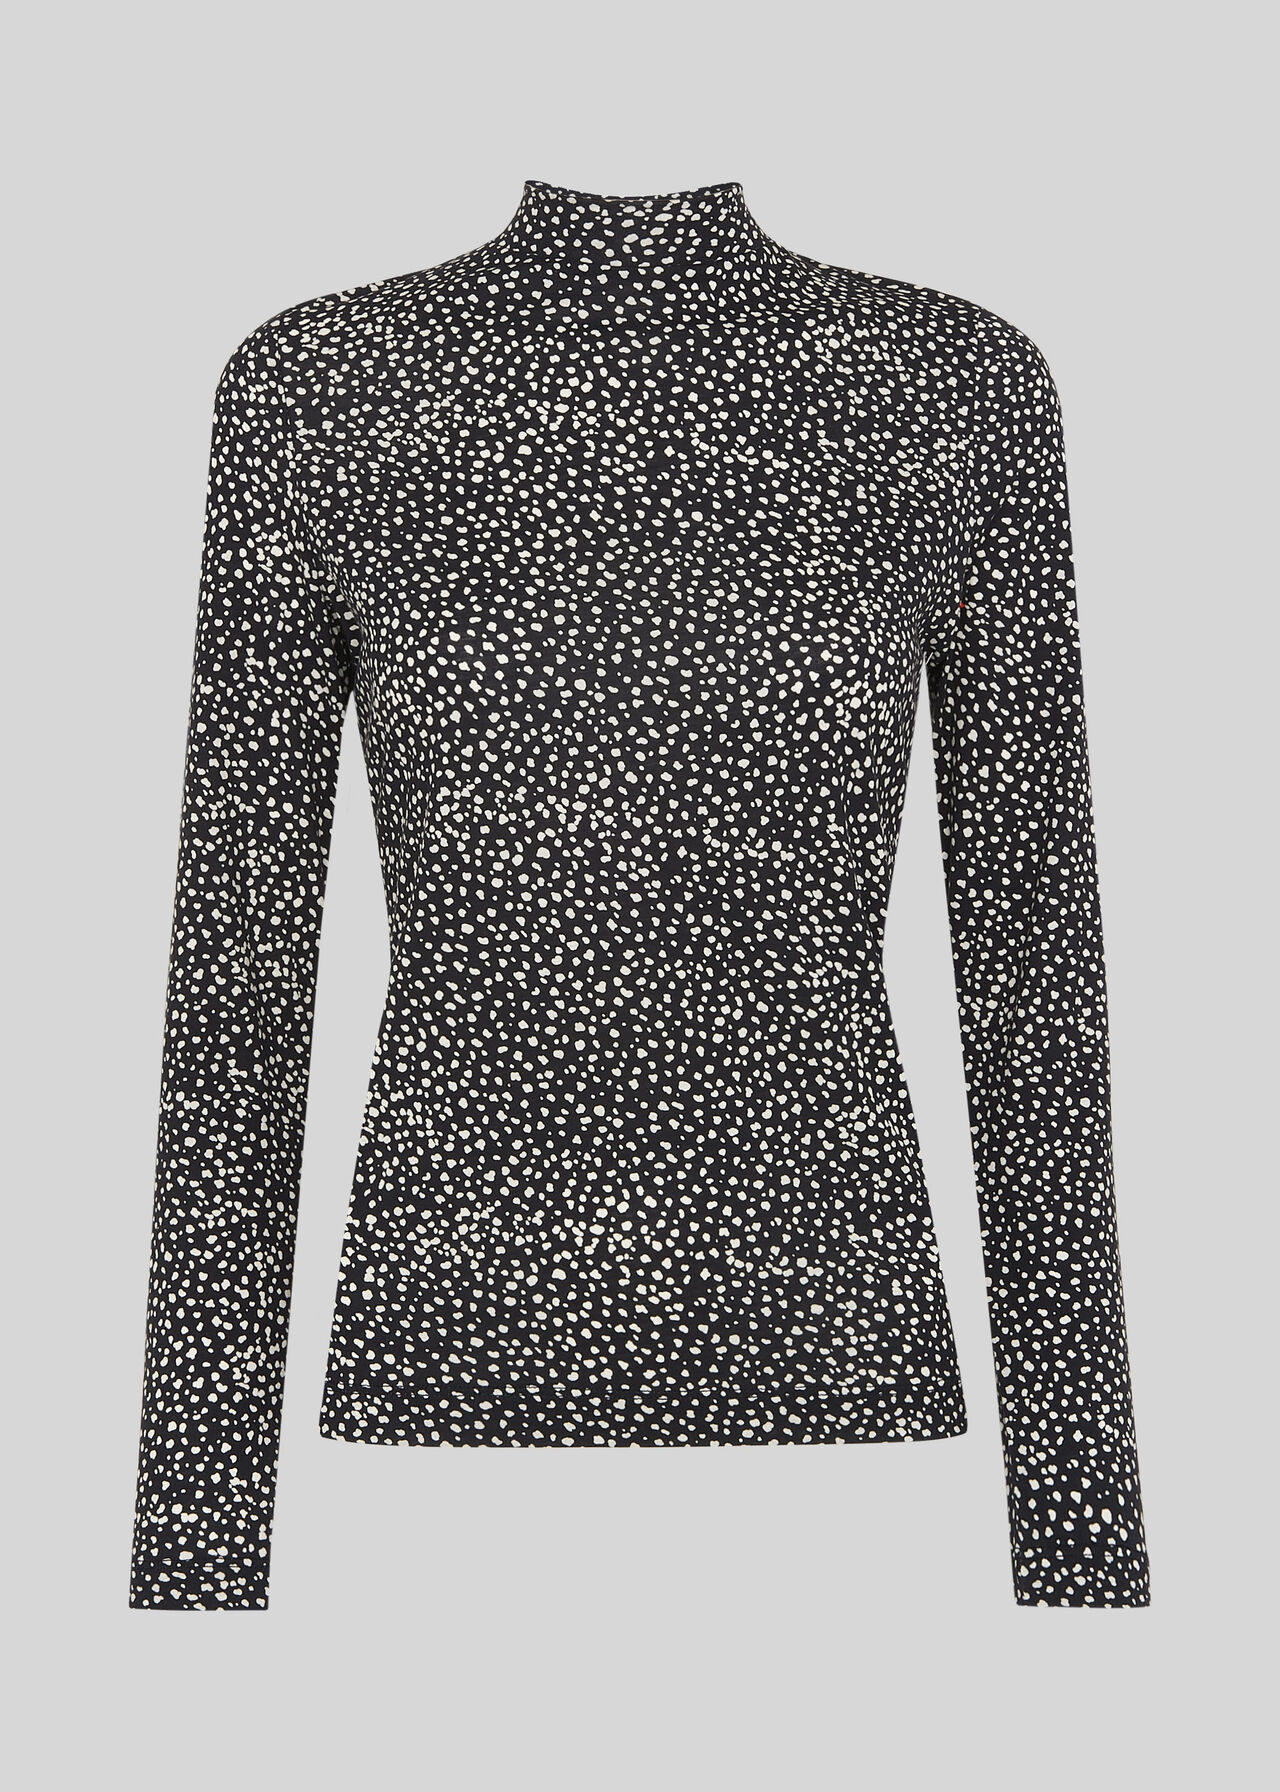 Mottled Spot Essential Top Black and White